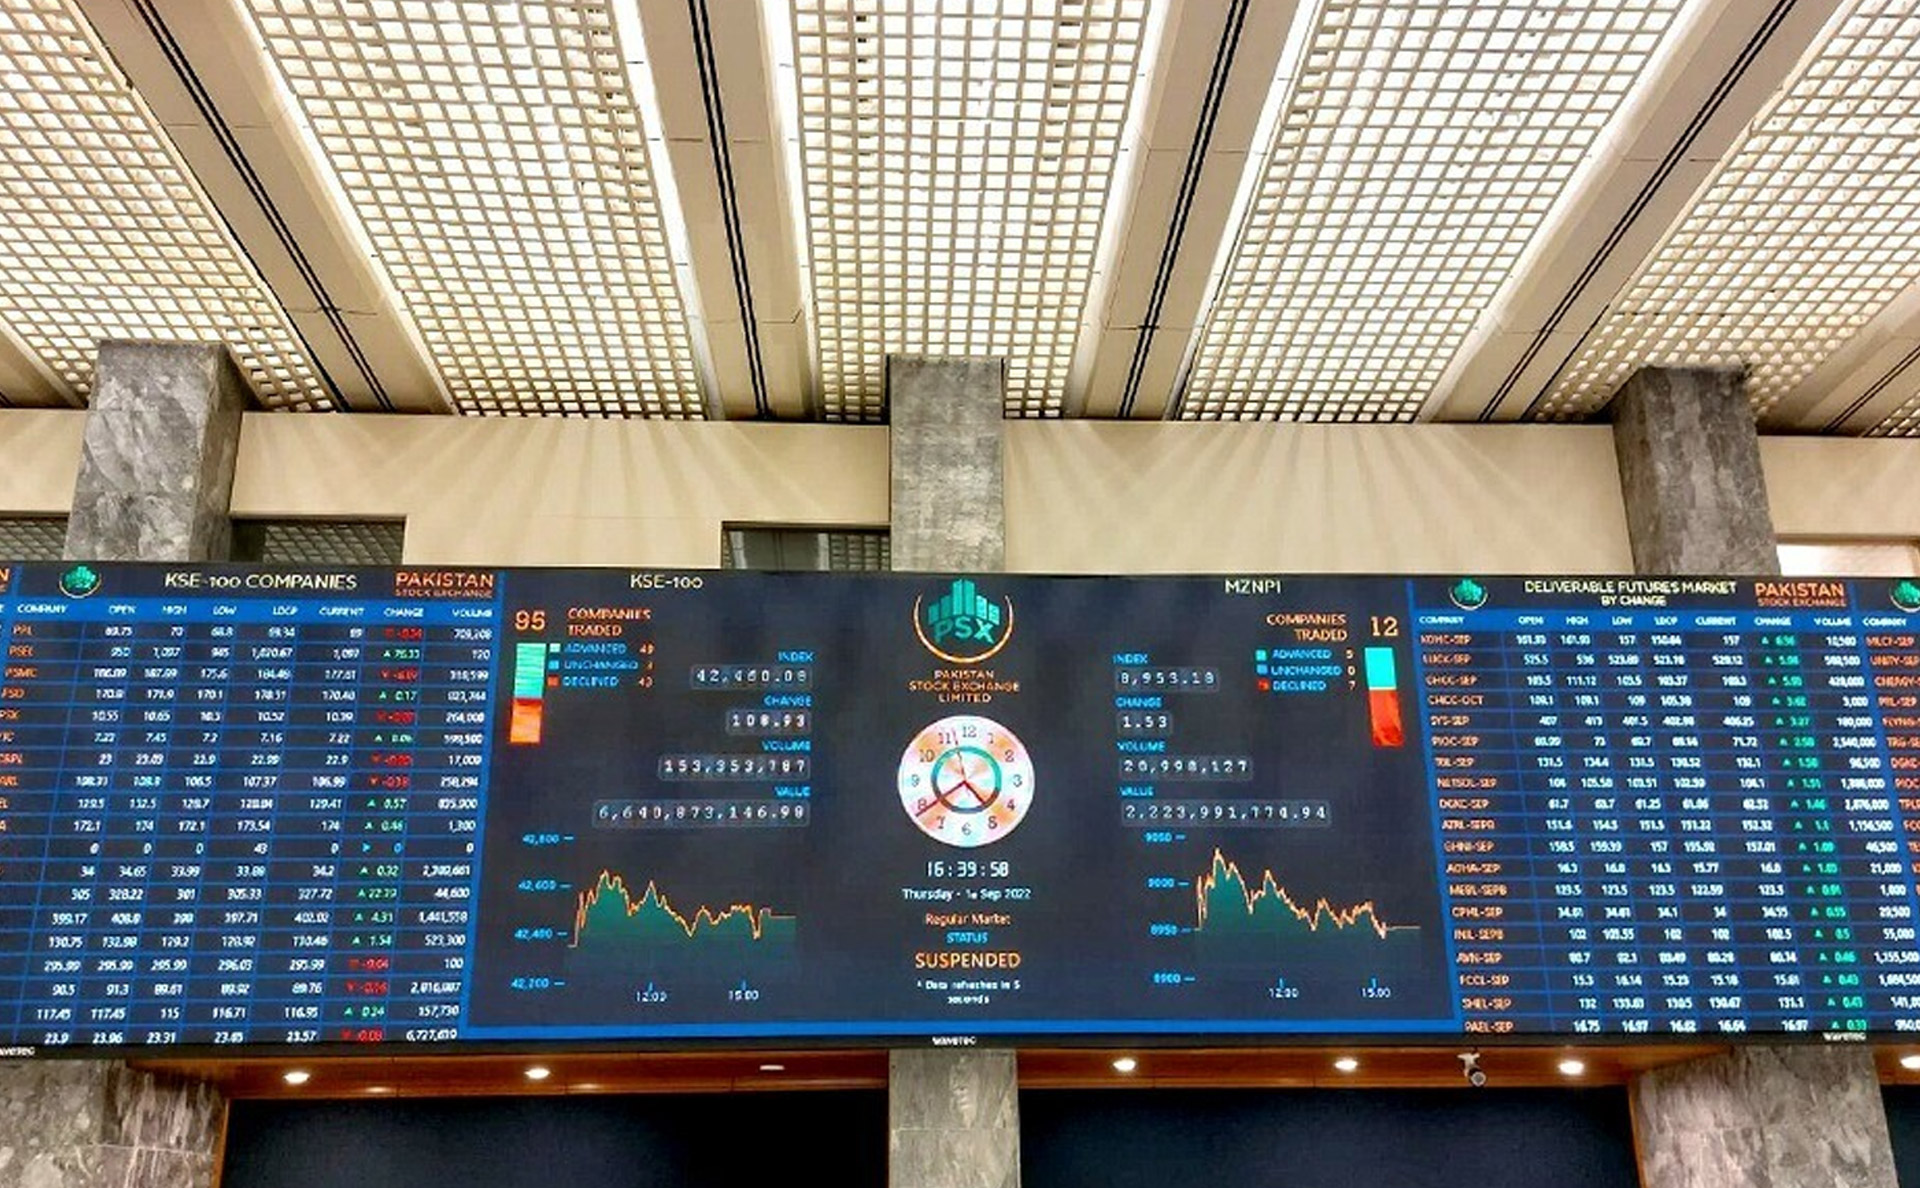 Pakistan Stock Exchange touches 56,000 mark for the first time in history